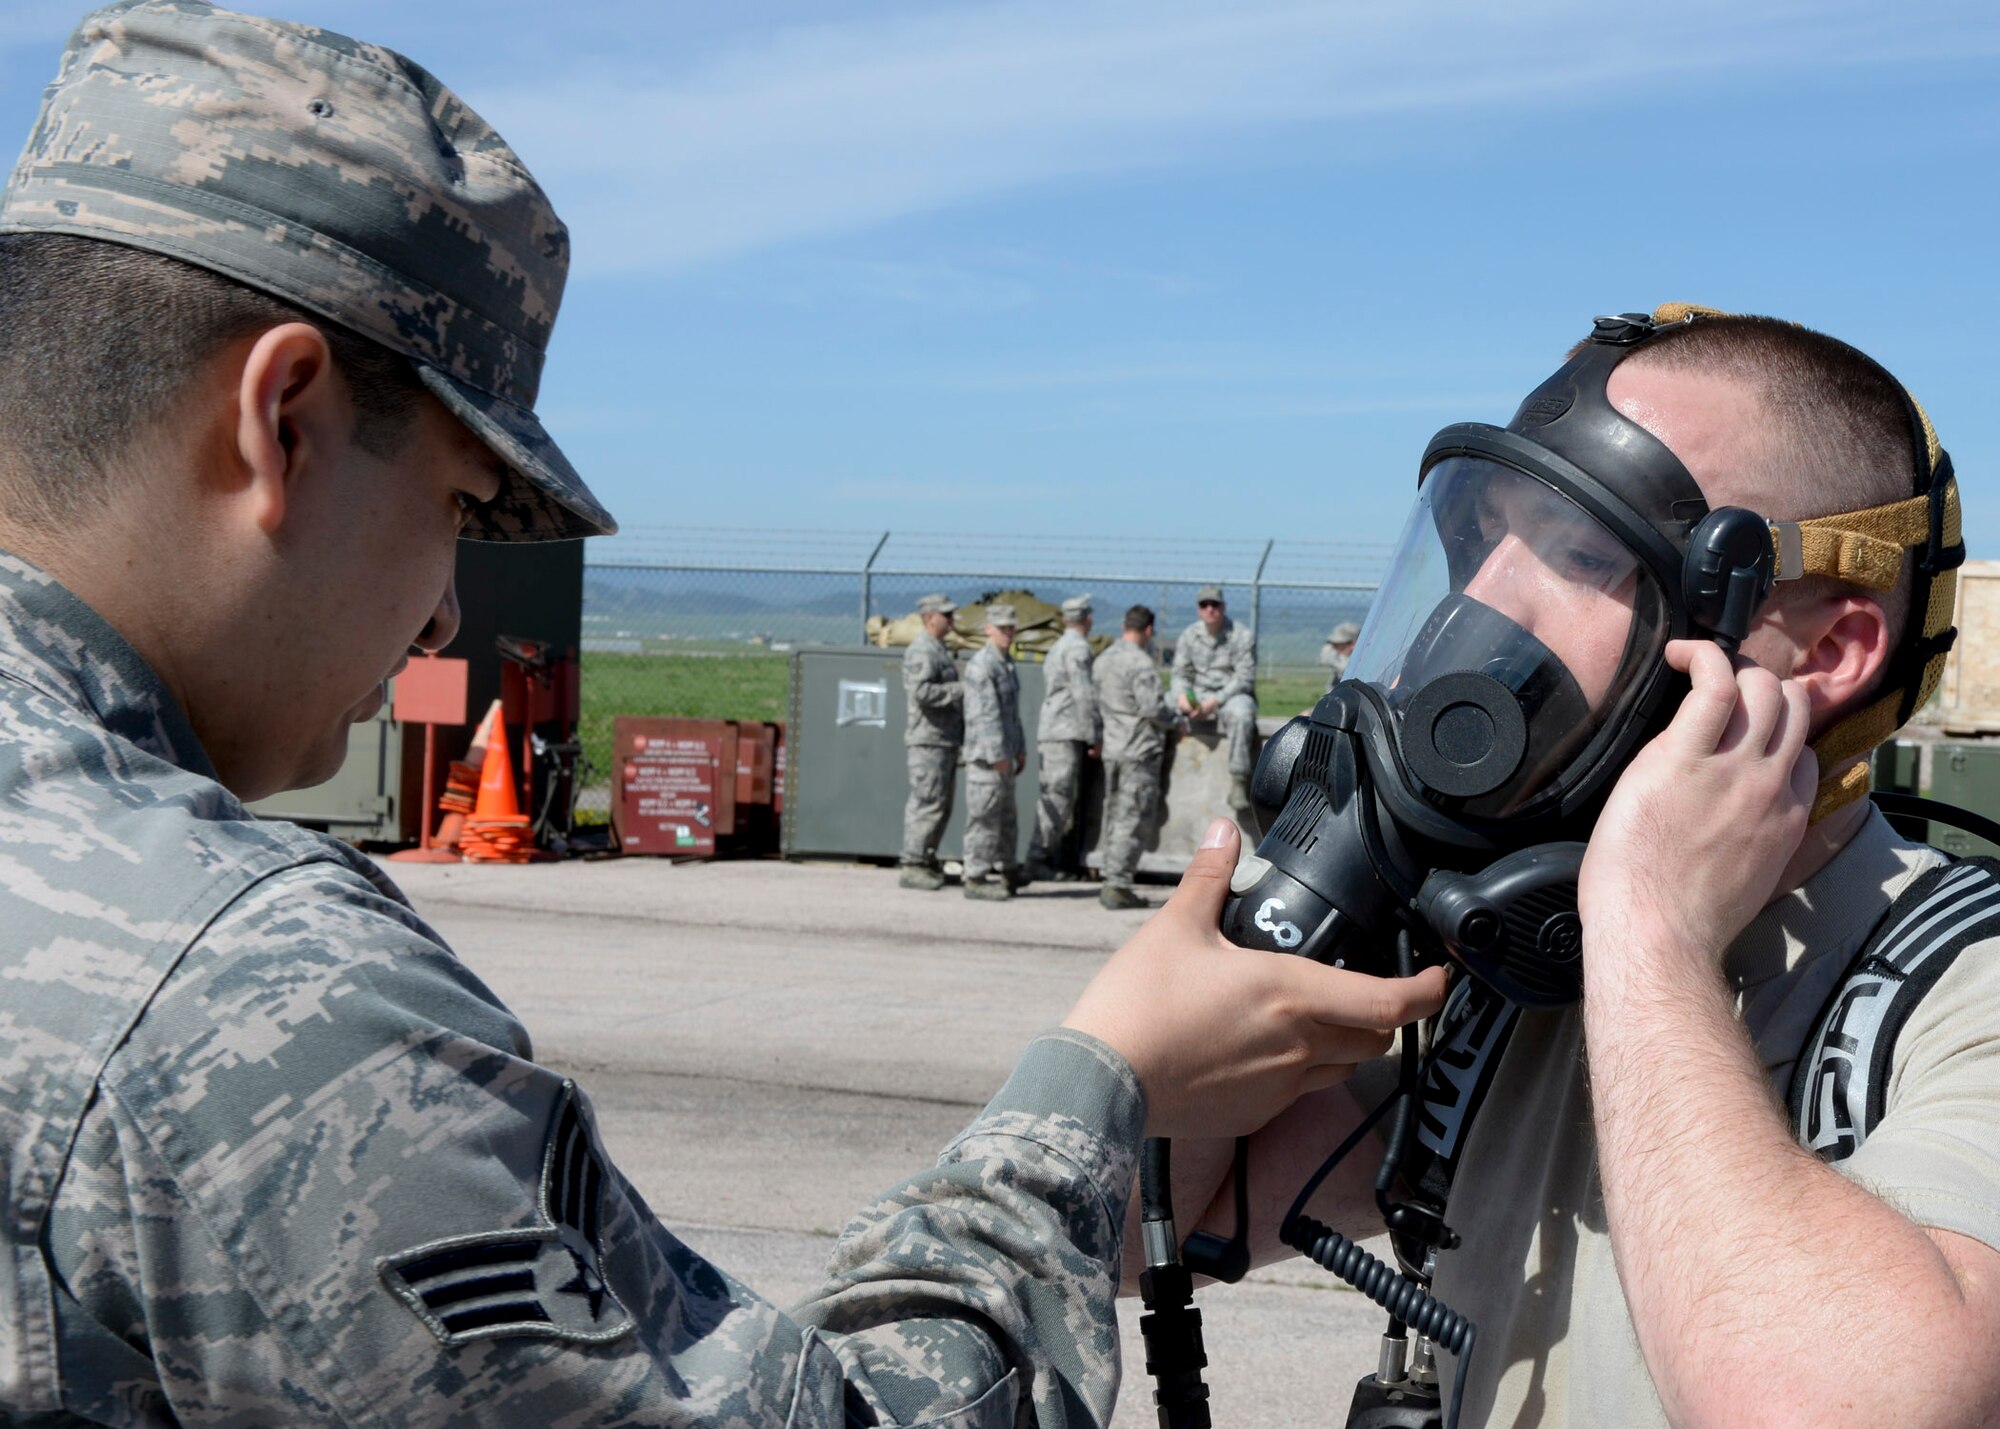 Senior Airman  Roger Pedraza, 28th Medical Operations Squadron bioenvironmental technician, assists Airman 1st Class Ronald Reynolds, 28th Civil Engineer Squadron emergency management technician, with his respiratory mask during an Integrated Base Emergency Response Capabilities Training at Ellsworth Air Force Base, S.D., May 22, 2014. The mask and Level-A suit protect emergency responders from hazardous materials and contaminated environments. (U.S. Air Force photo by Senior Airman Anania Tekurio/Released)